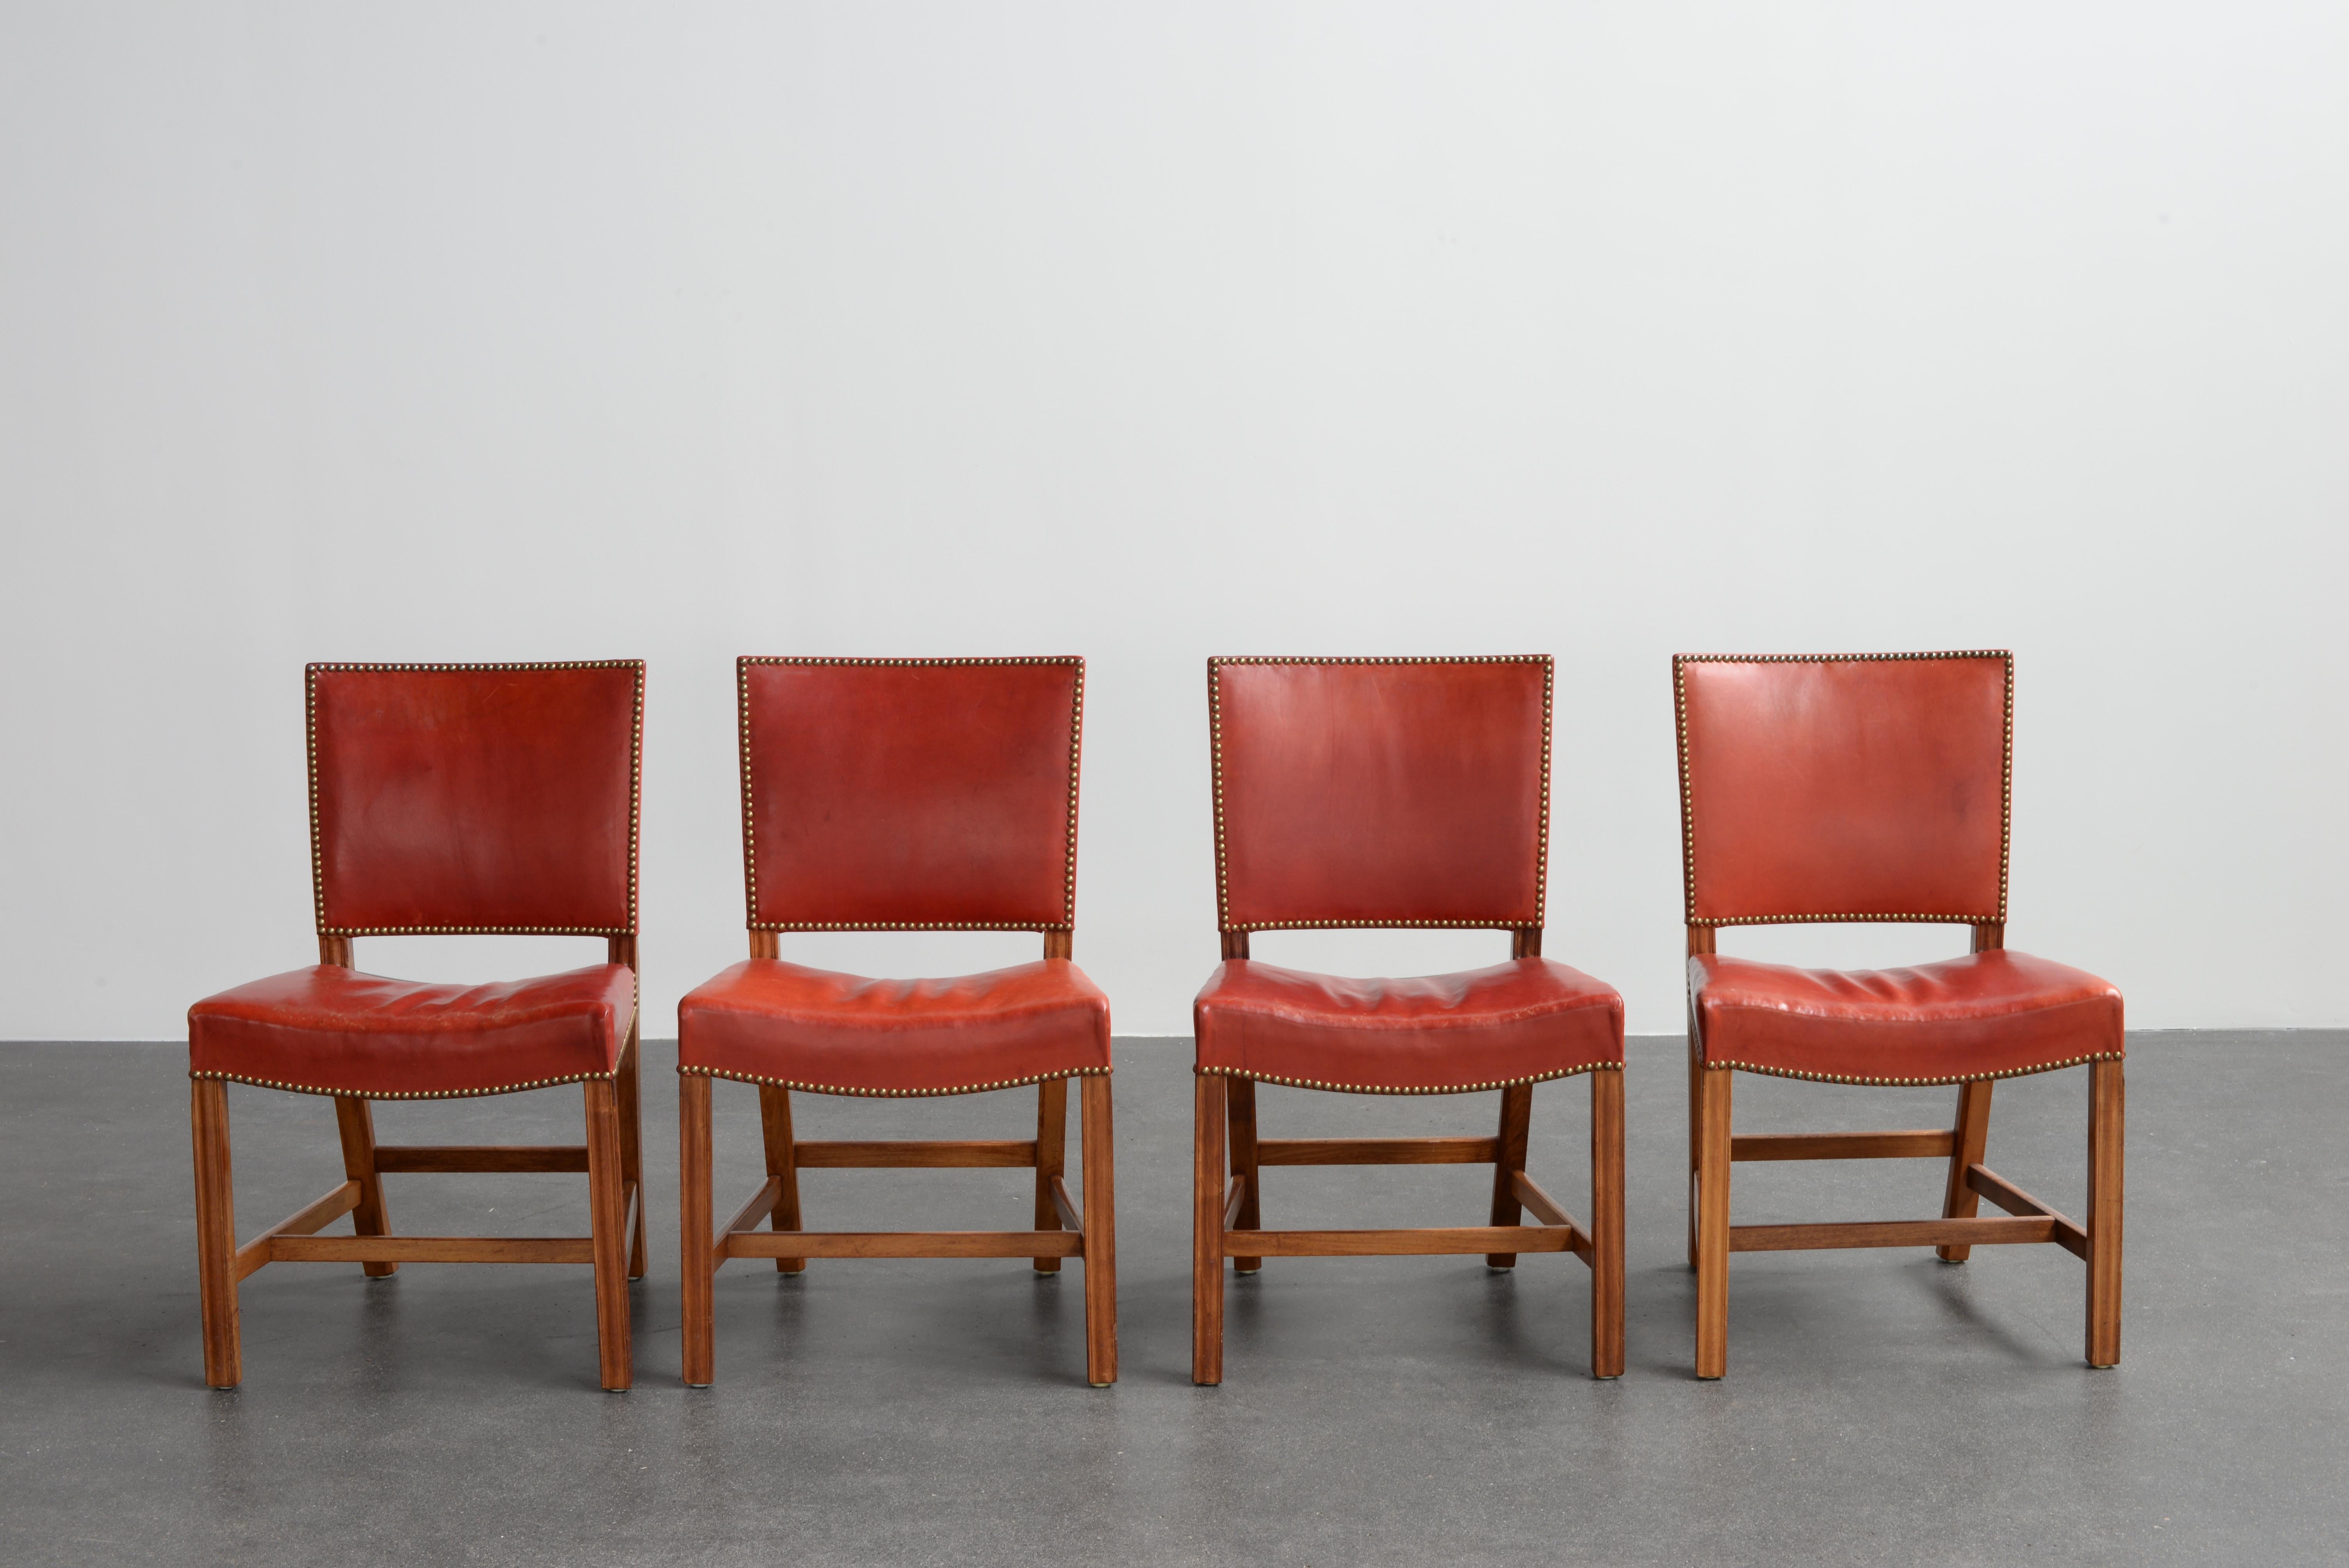 Kaare Klint set of for Red chairs in mahogany, leather and brass. Executed by Rud. Rasmussen.